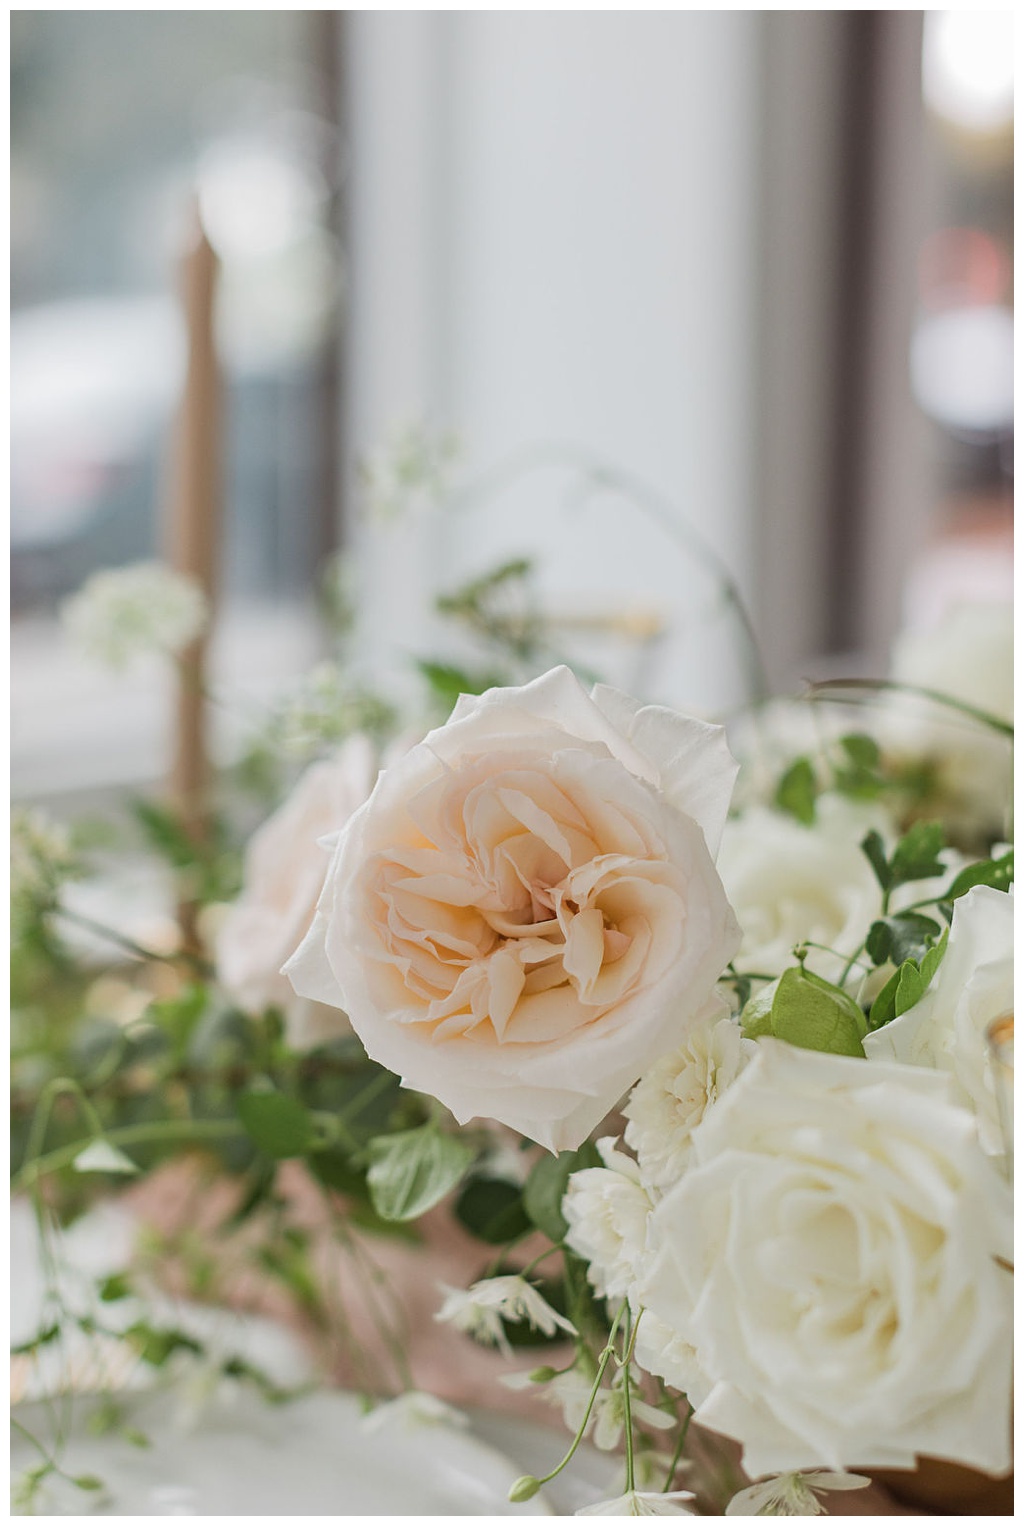 Blush and white garden roses in a May wedding arrangement